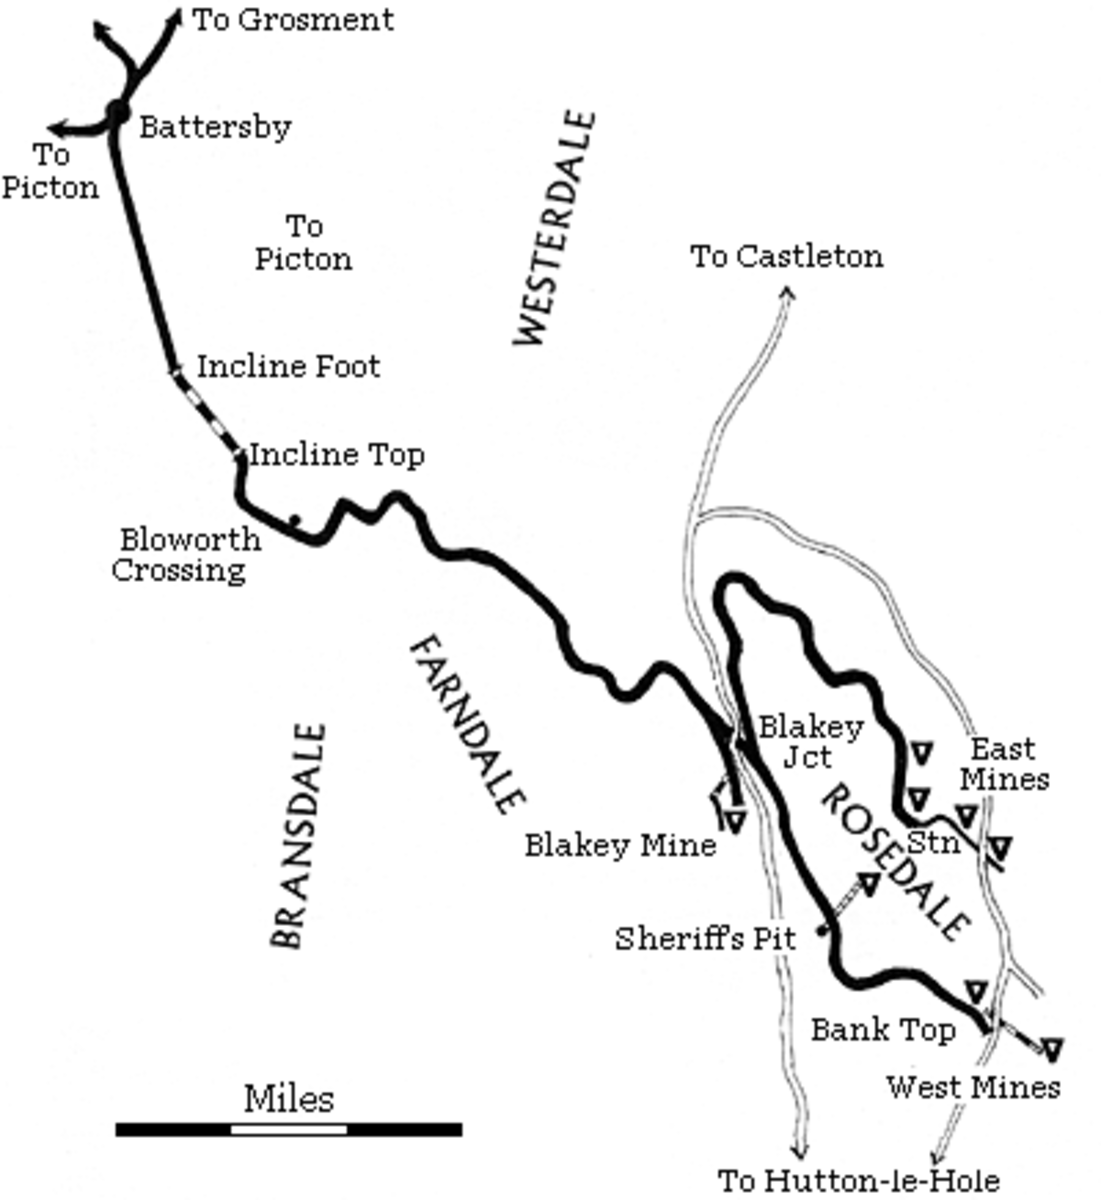 The branch left Battersby Junction, climbed to Ingleby Incline, self-acting to Incline Top, across moorland to Blakey Jct before dividing - south to Rosedale West, around Rosedale Head to Rosedale East with spurs at Blakey and Rosedale West